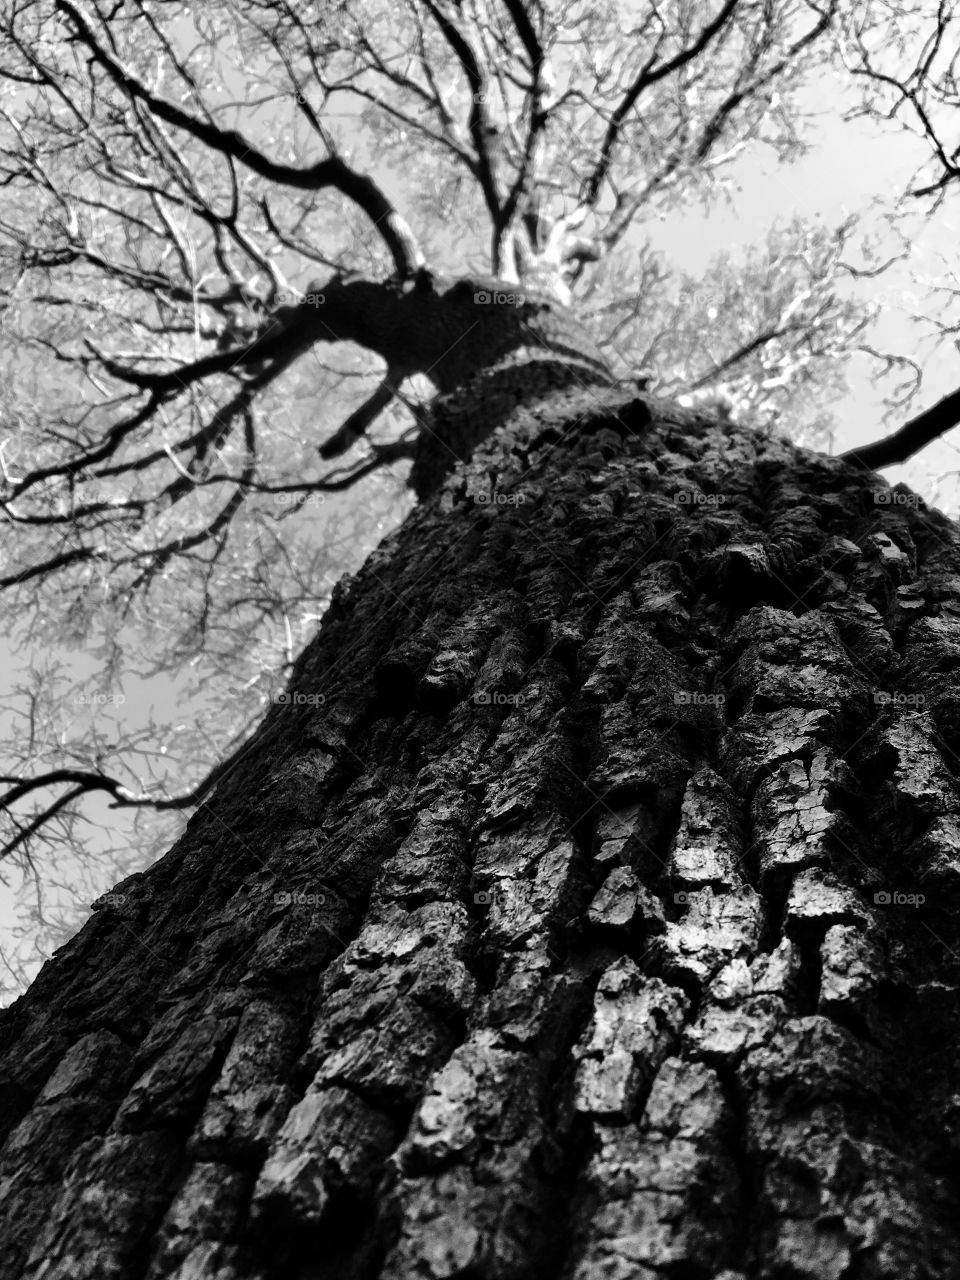 Pedinculate oak black and white shot from a pointperspective view